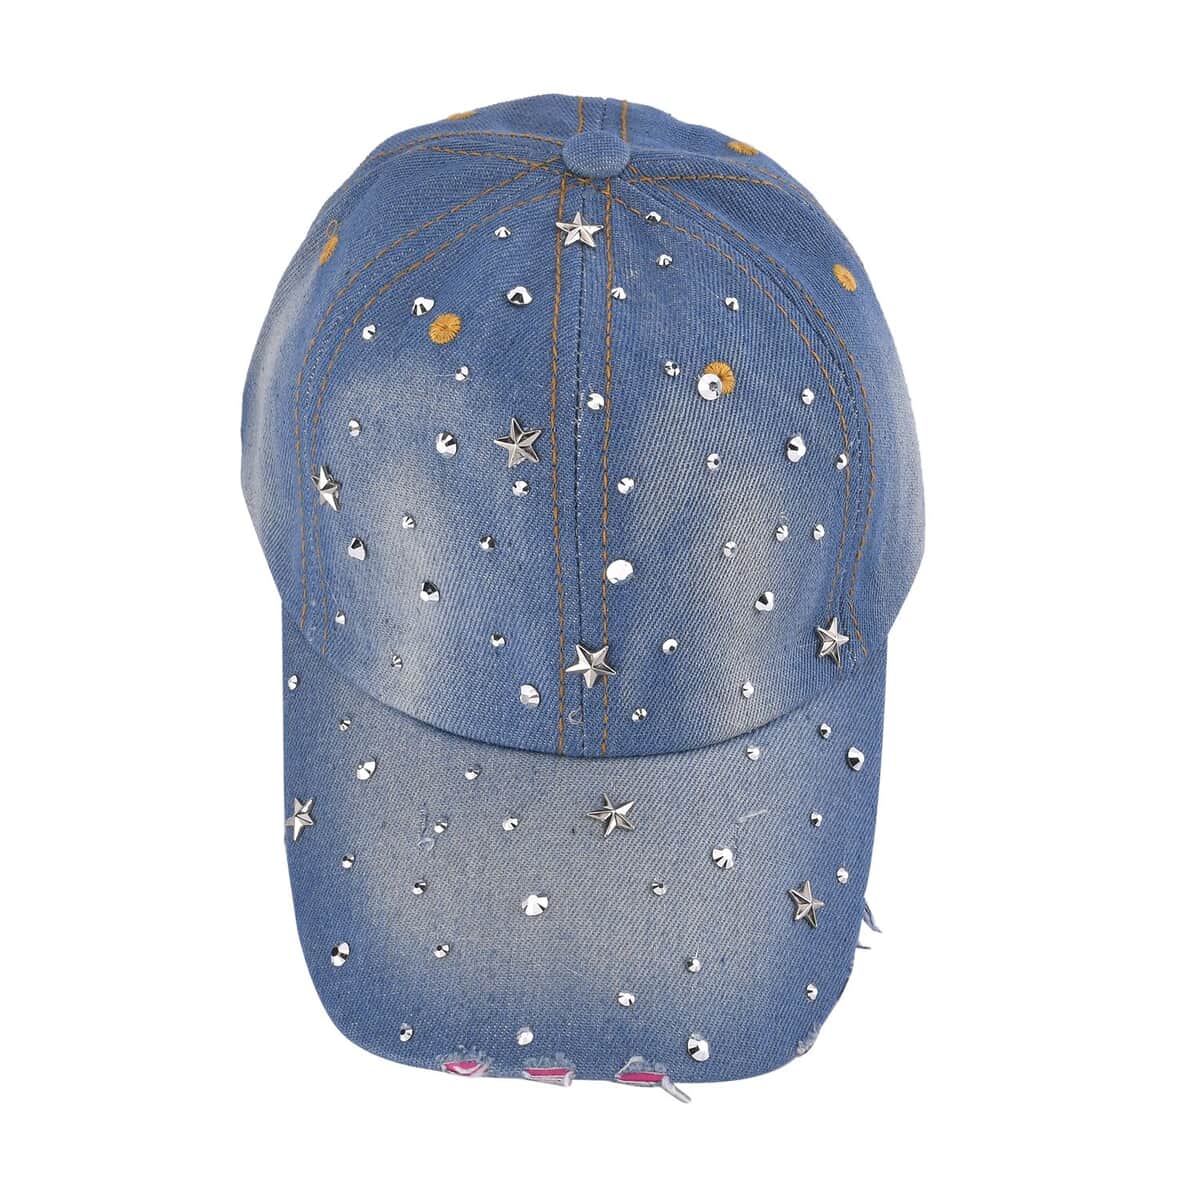 Shining Crystal and Unique Design Cap with Velcro Fasteners (Adjustable Strap) - Blue image number 0